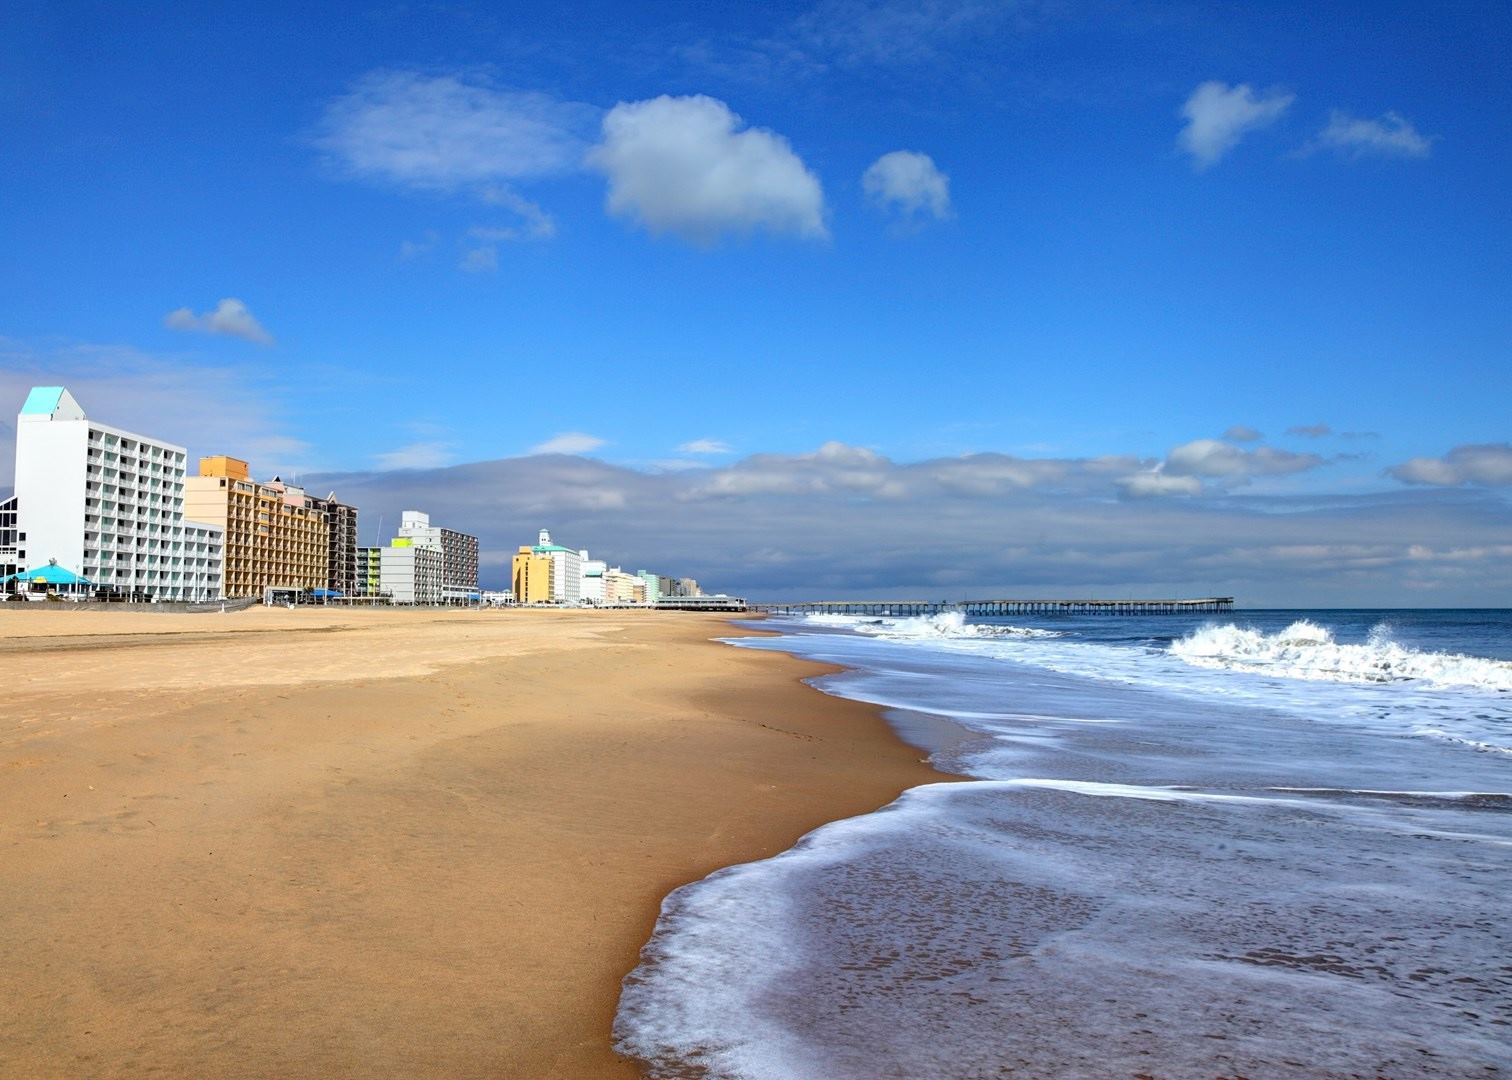 Visit Virginia Beach on a trip to The USA | Audley Travel